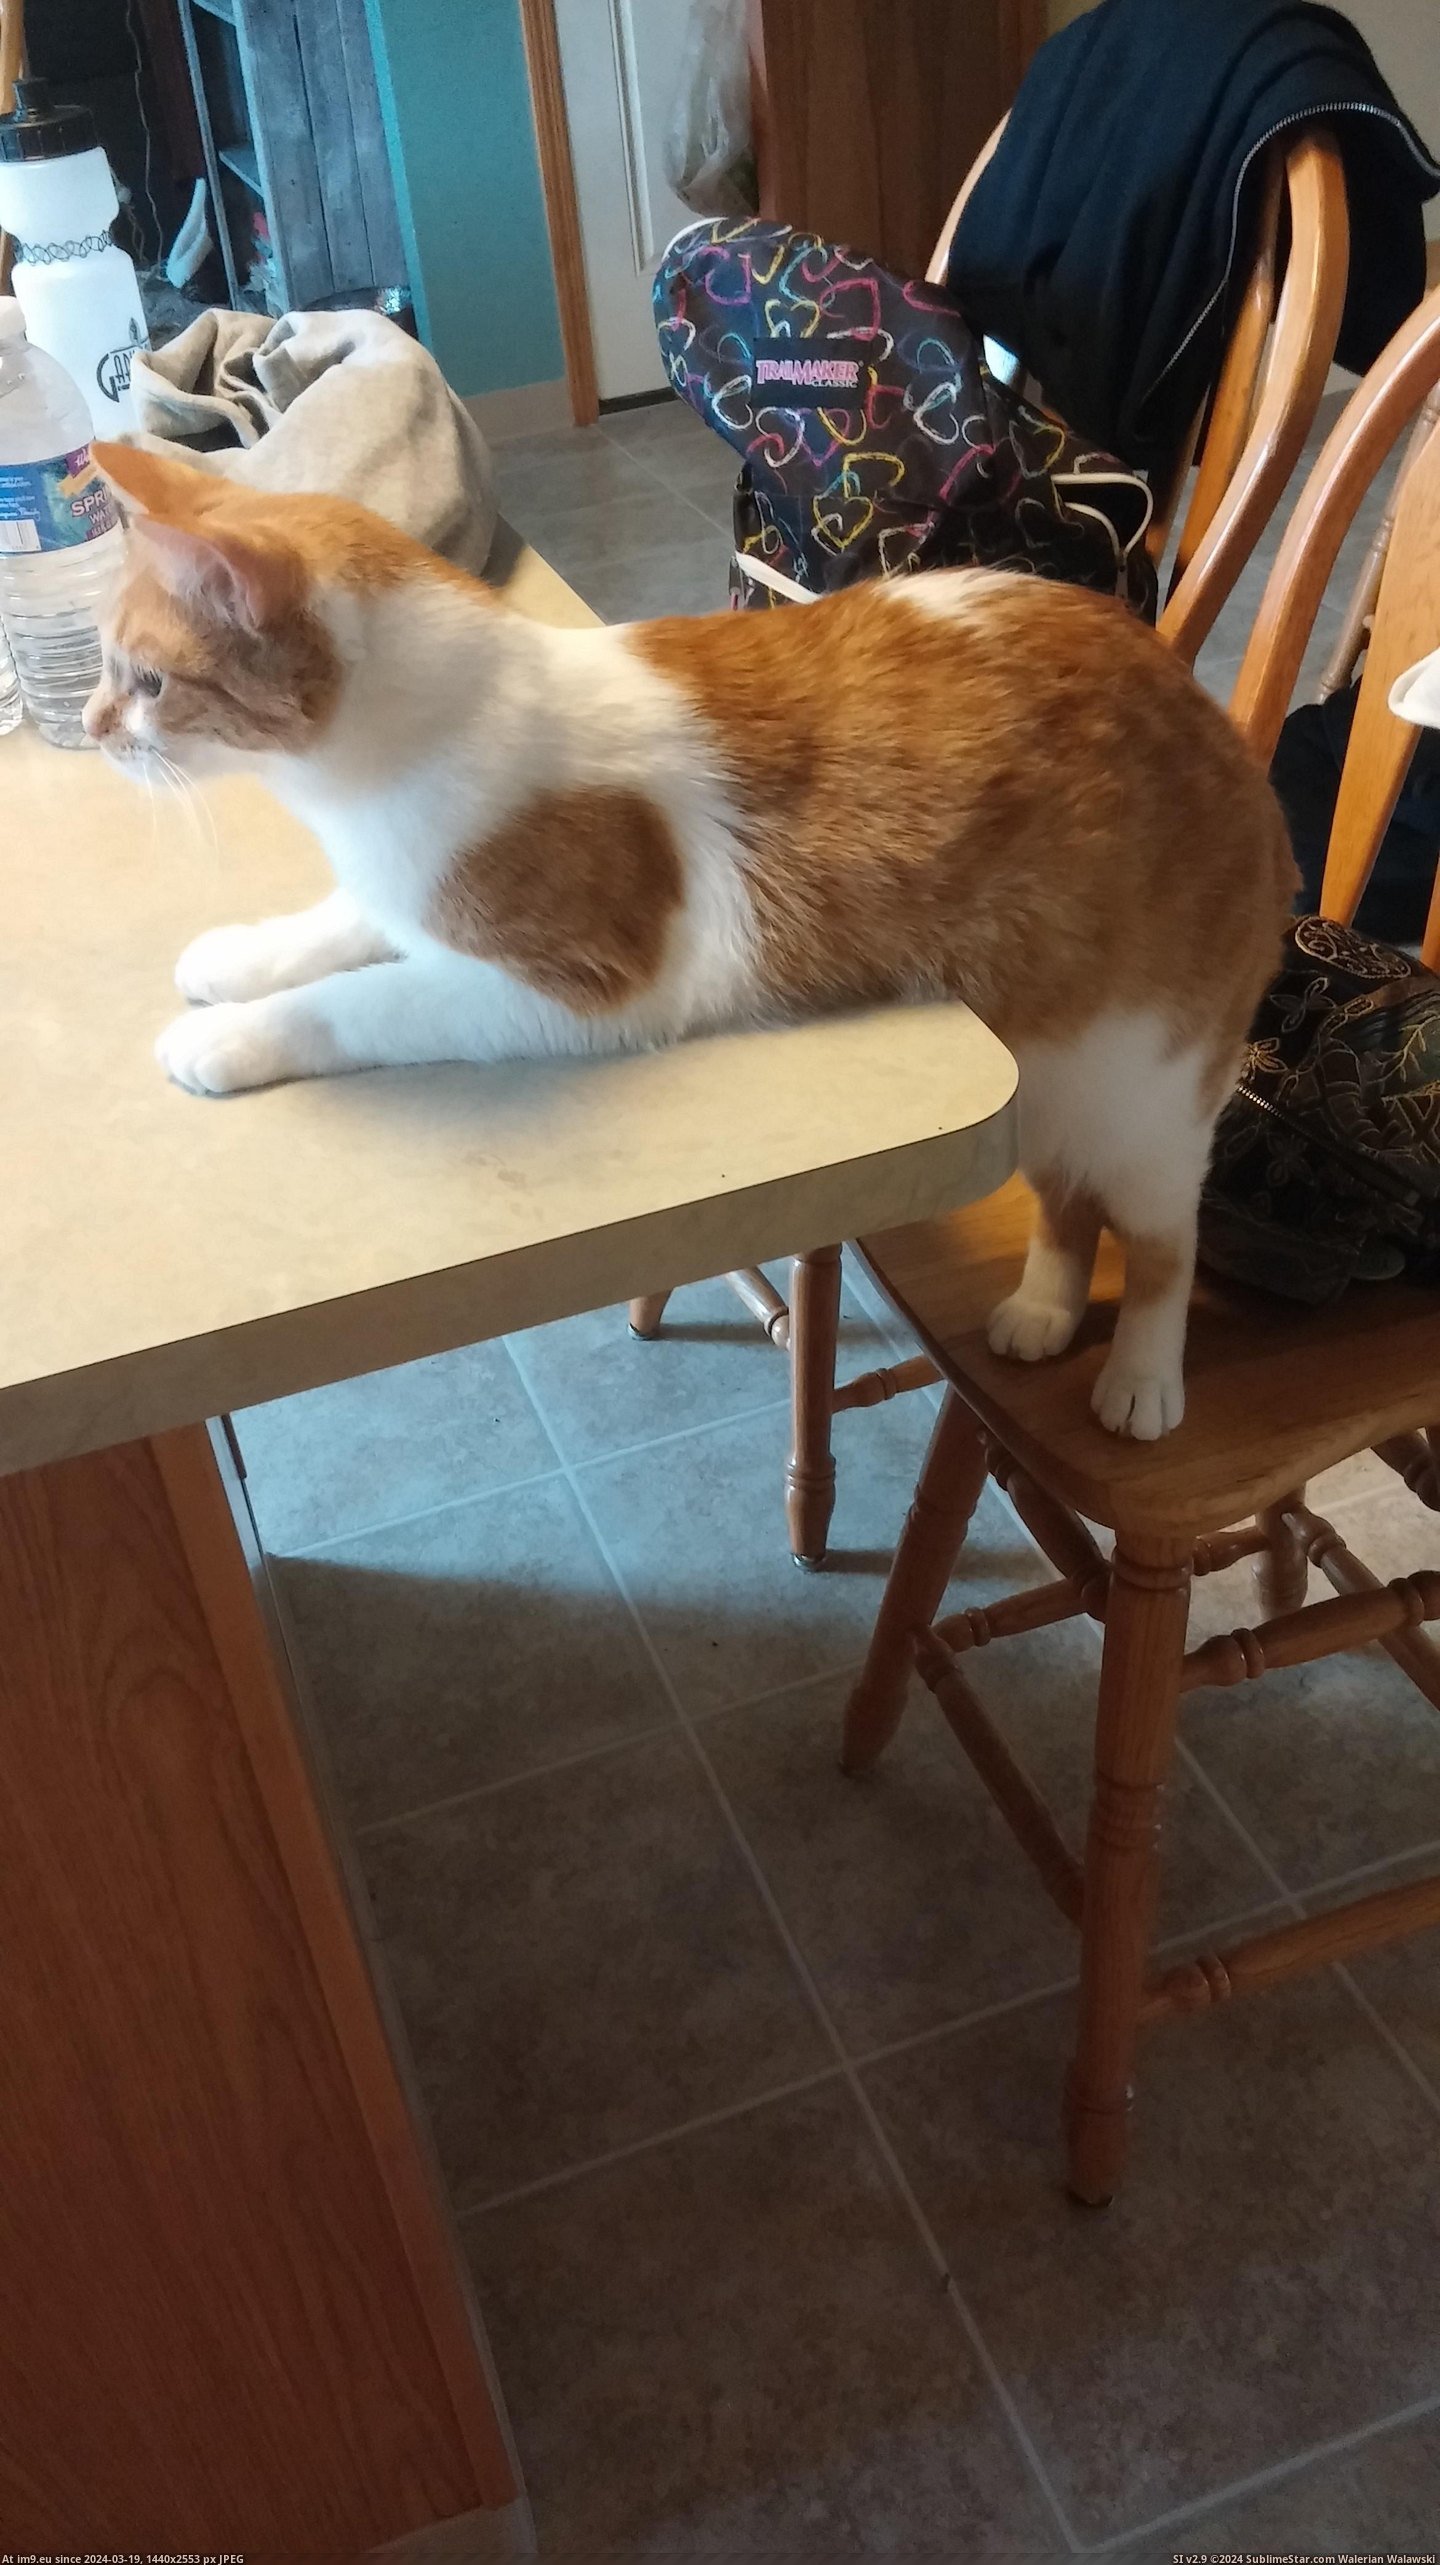 #Cat #Pushing #Charles #Allowed [Aww] My cat Charles is also not allowed on the table. He's pushing it though... Pic. (Bild von album My r/AWW favs))